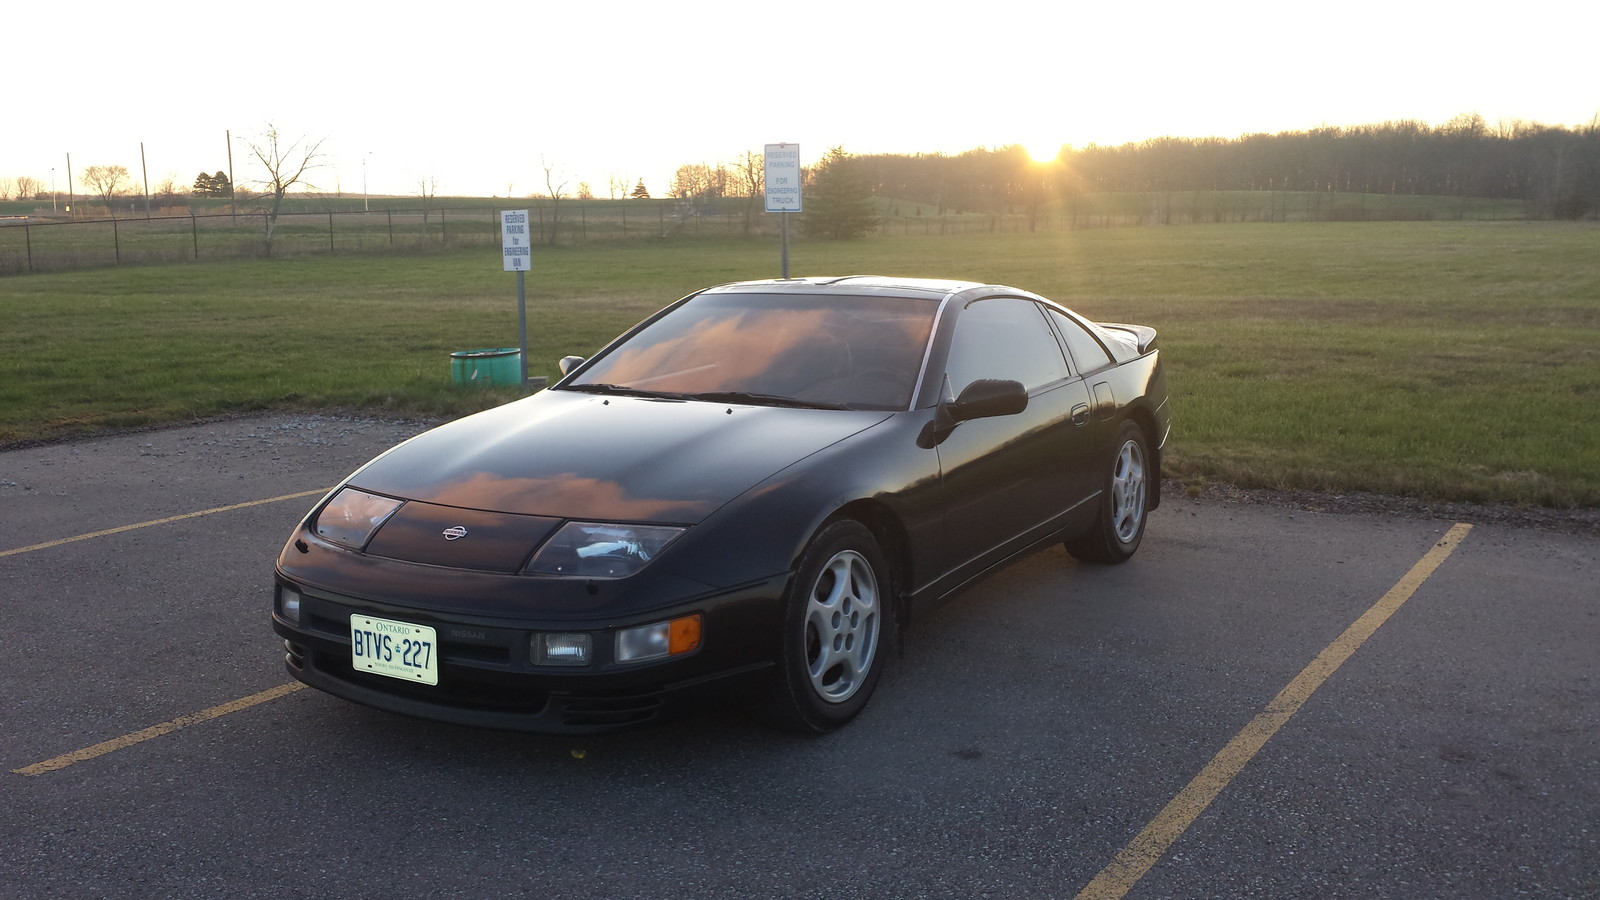 Nissan 300zx twin turbo 1/4 mile time #5